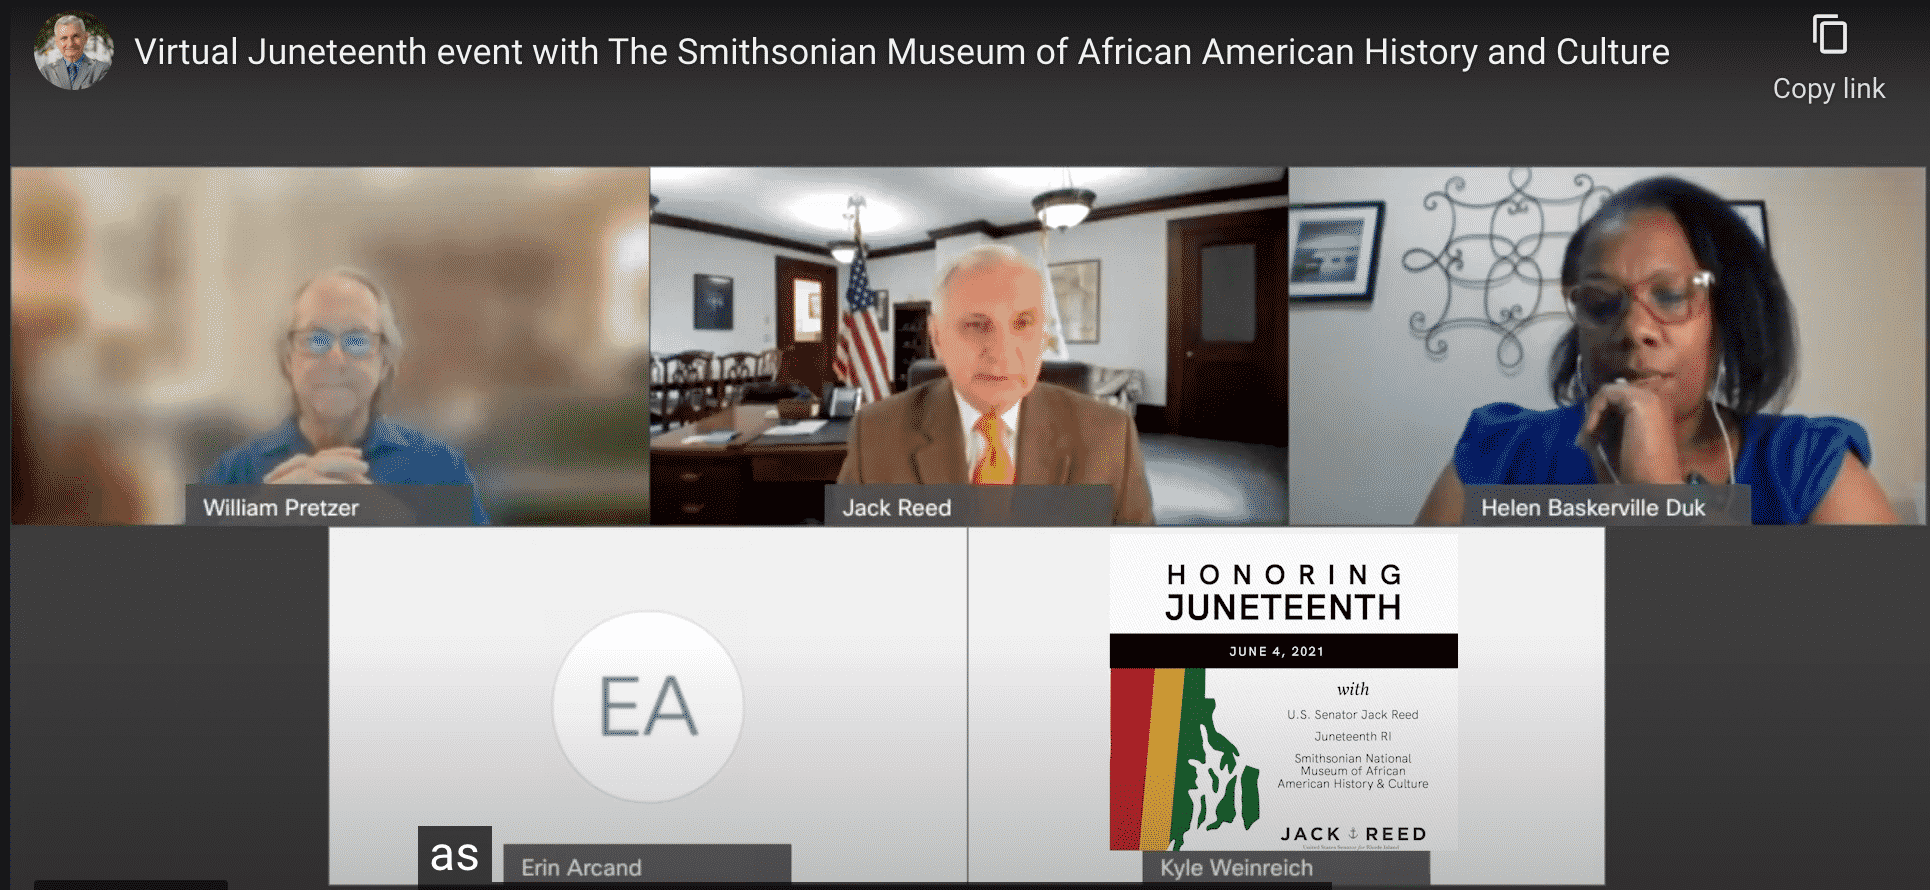 [CREDIT: Sen. Jack Reed's Office] US Sen. Jack Reed, who co-sponsored a bill in the Senate making Juneteenth a federal holiday, held an online observance of the holiday.